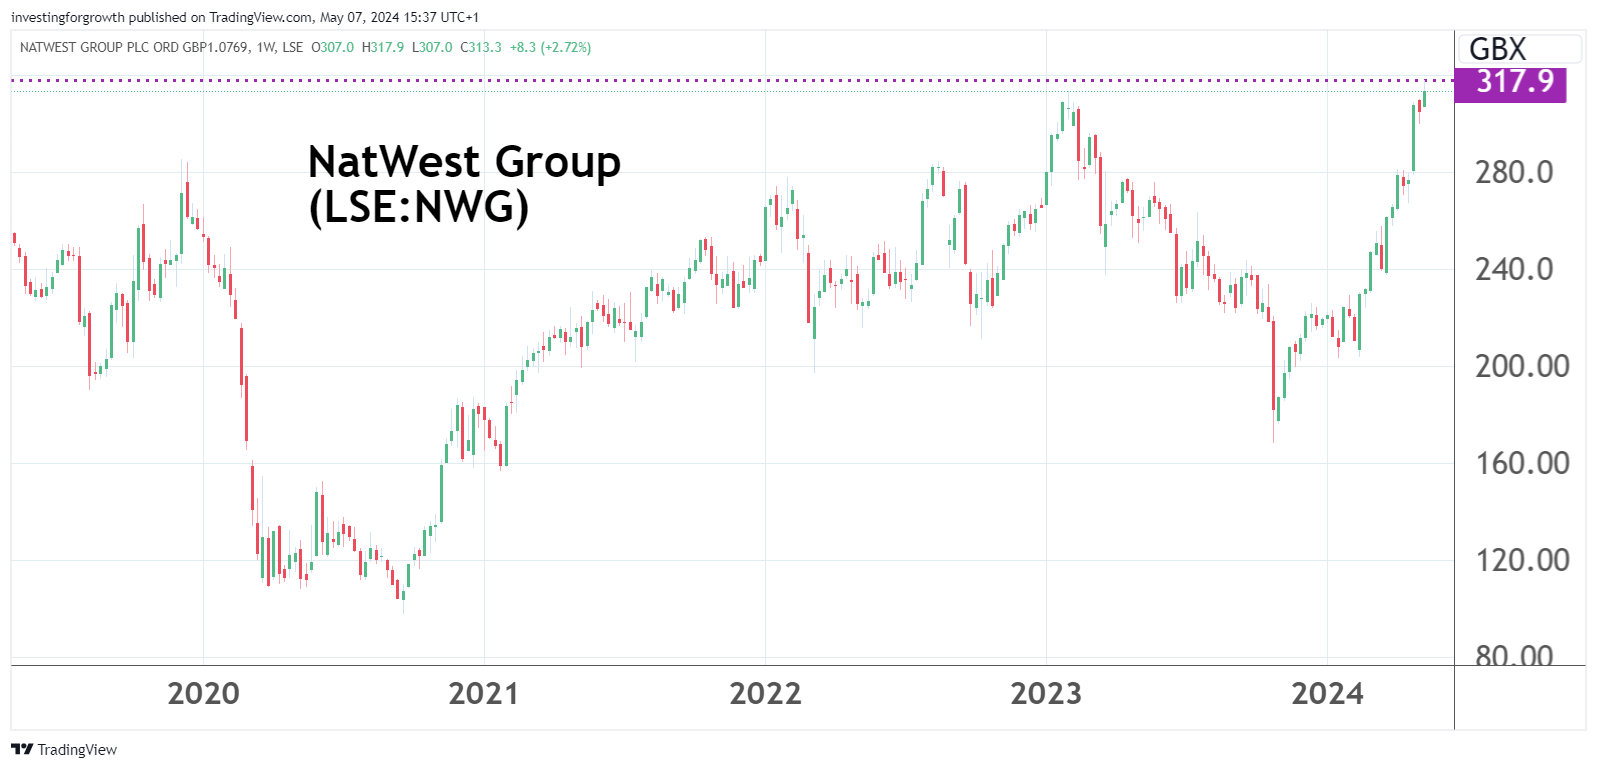 NatWest Group performance chart